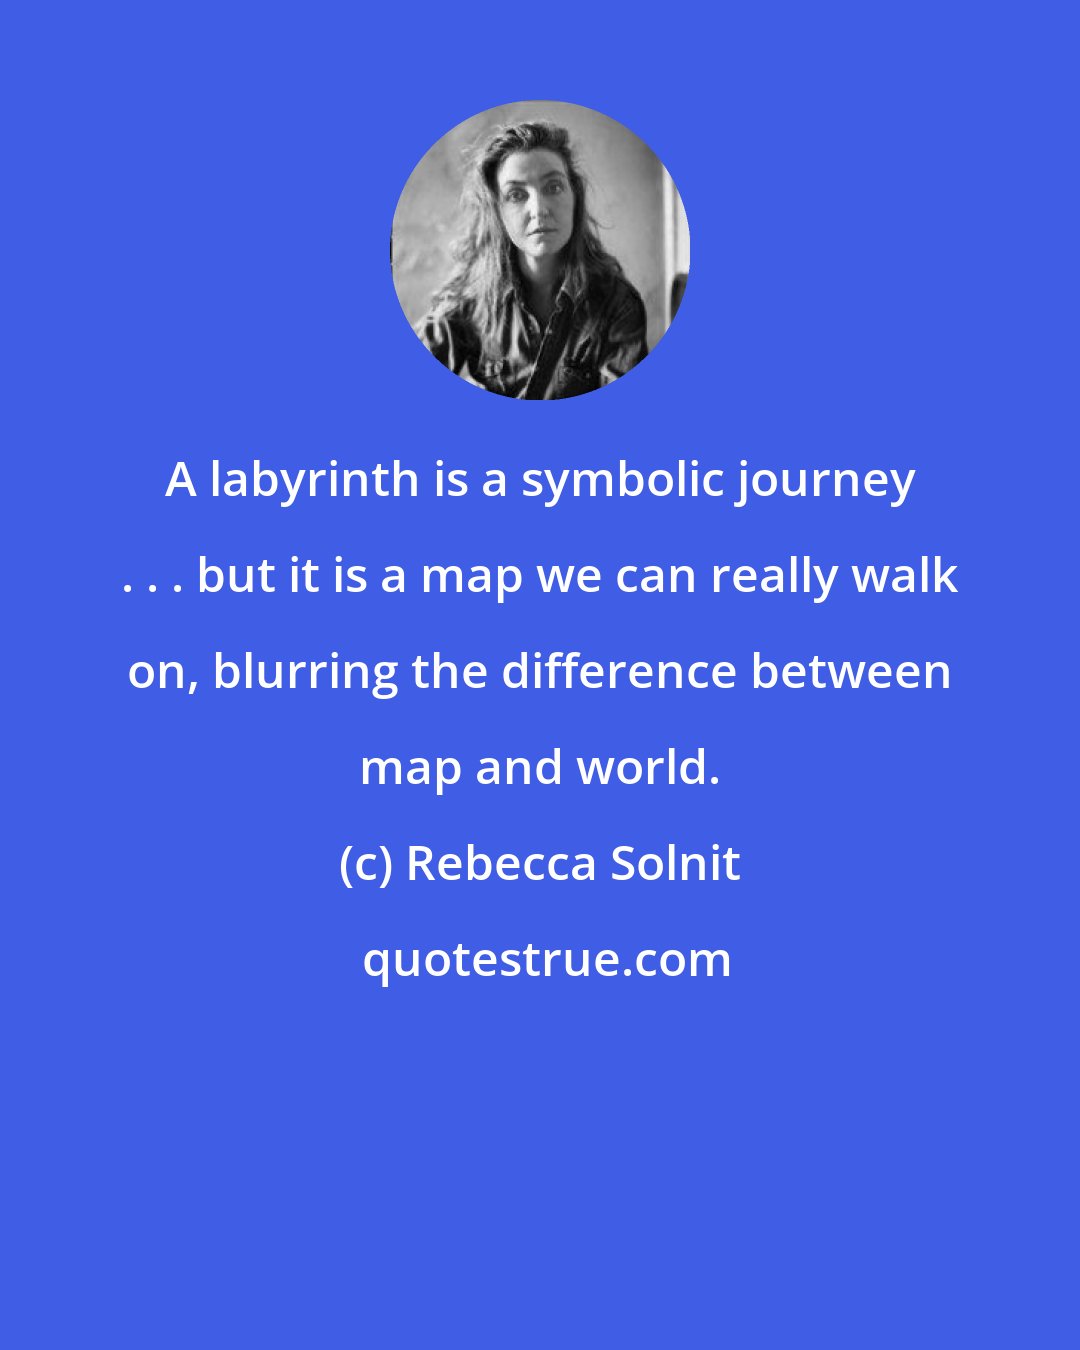 Rebecca Solnit: A labyrinth is a symbolic journey . . . but it is a map we can really walk on, blurring the difference between map and world.